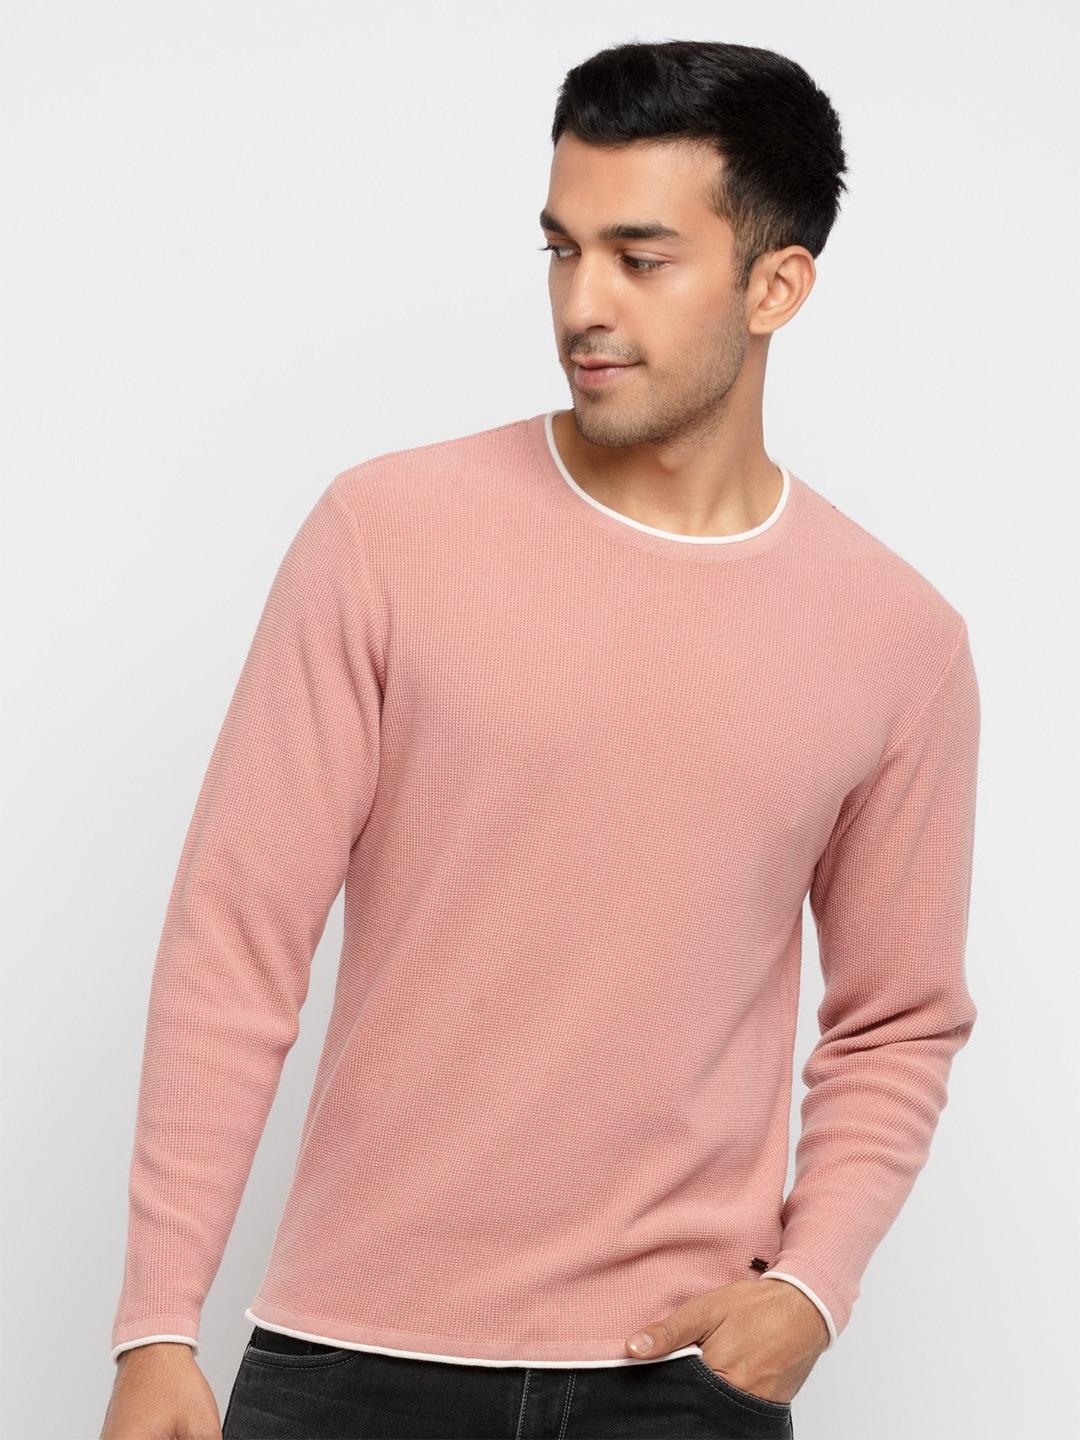 status quo men pink & white solid acrylic pullover